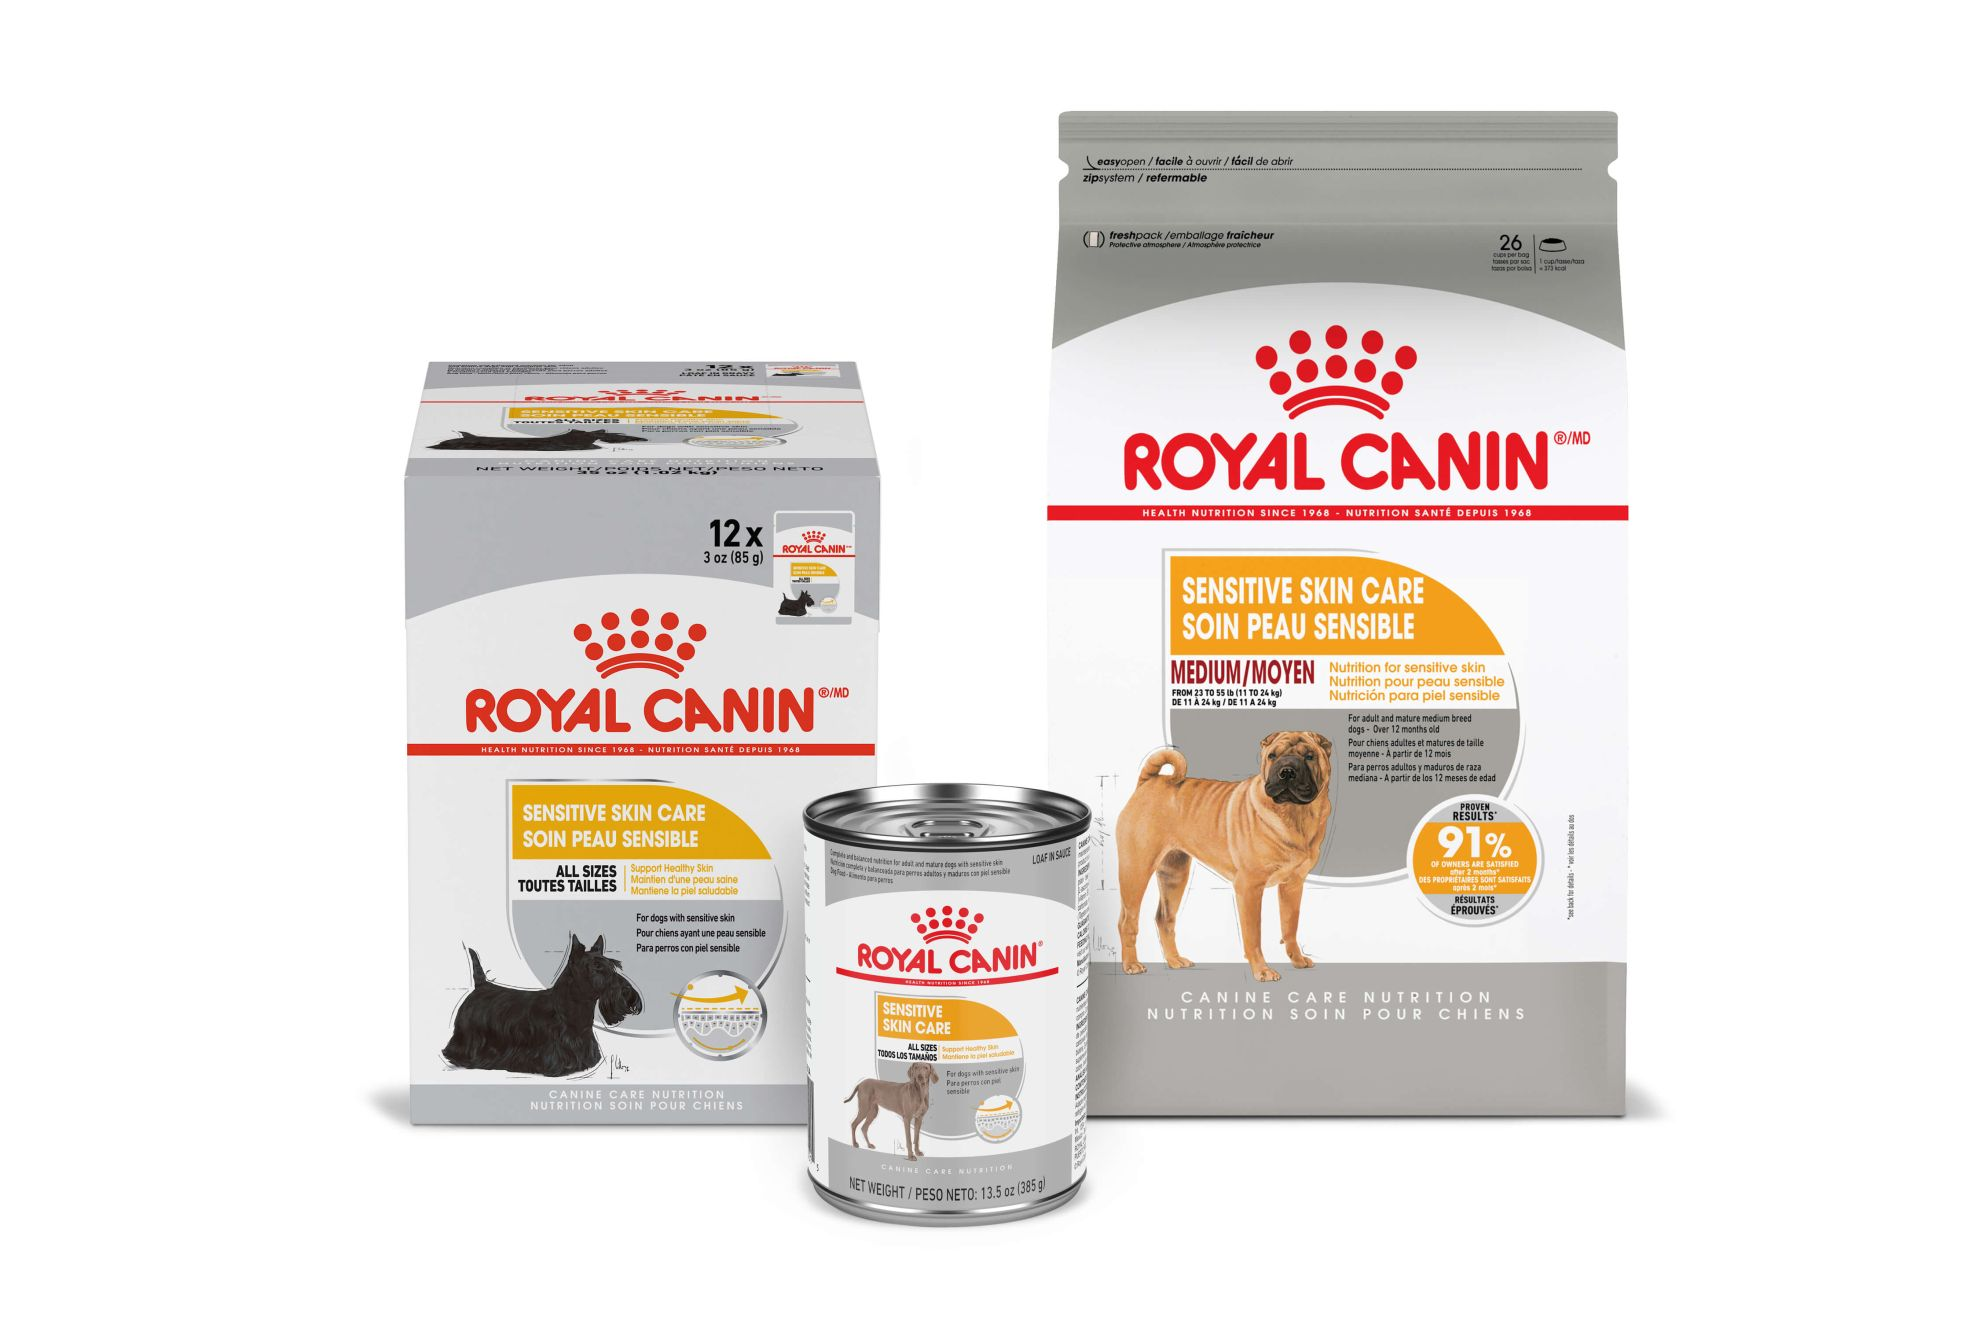 Royal Canin Sensitive Skin Care Range of Products